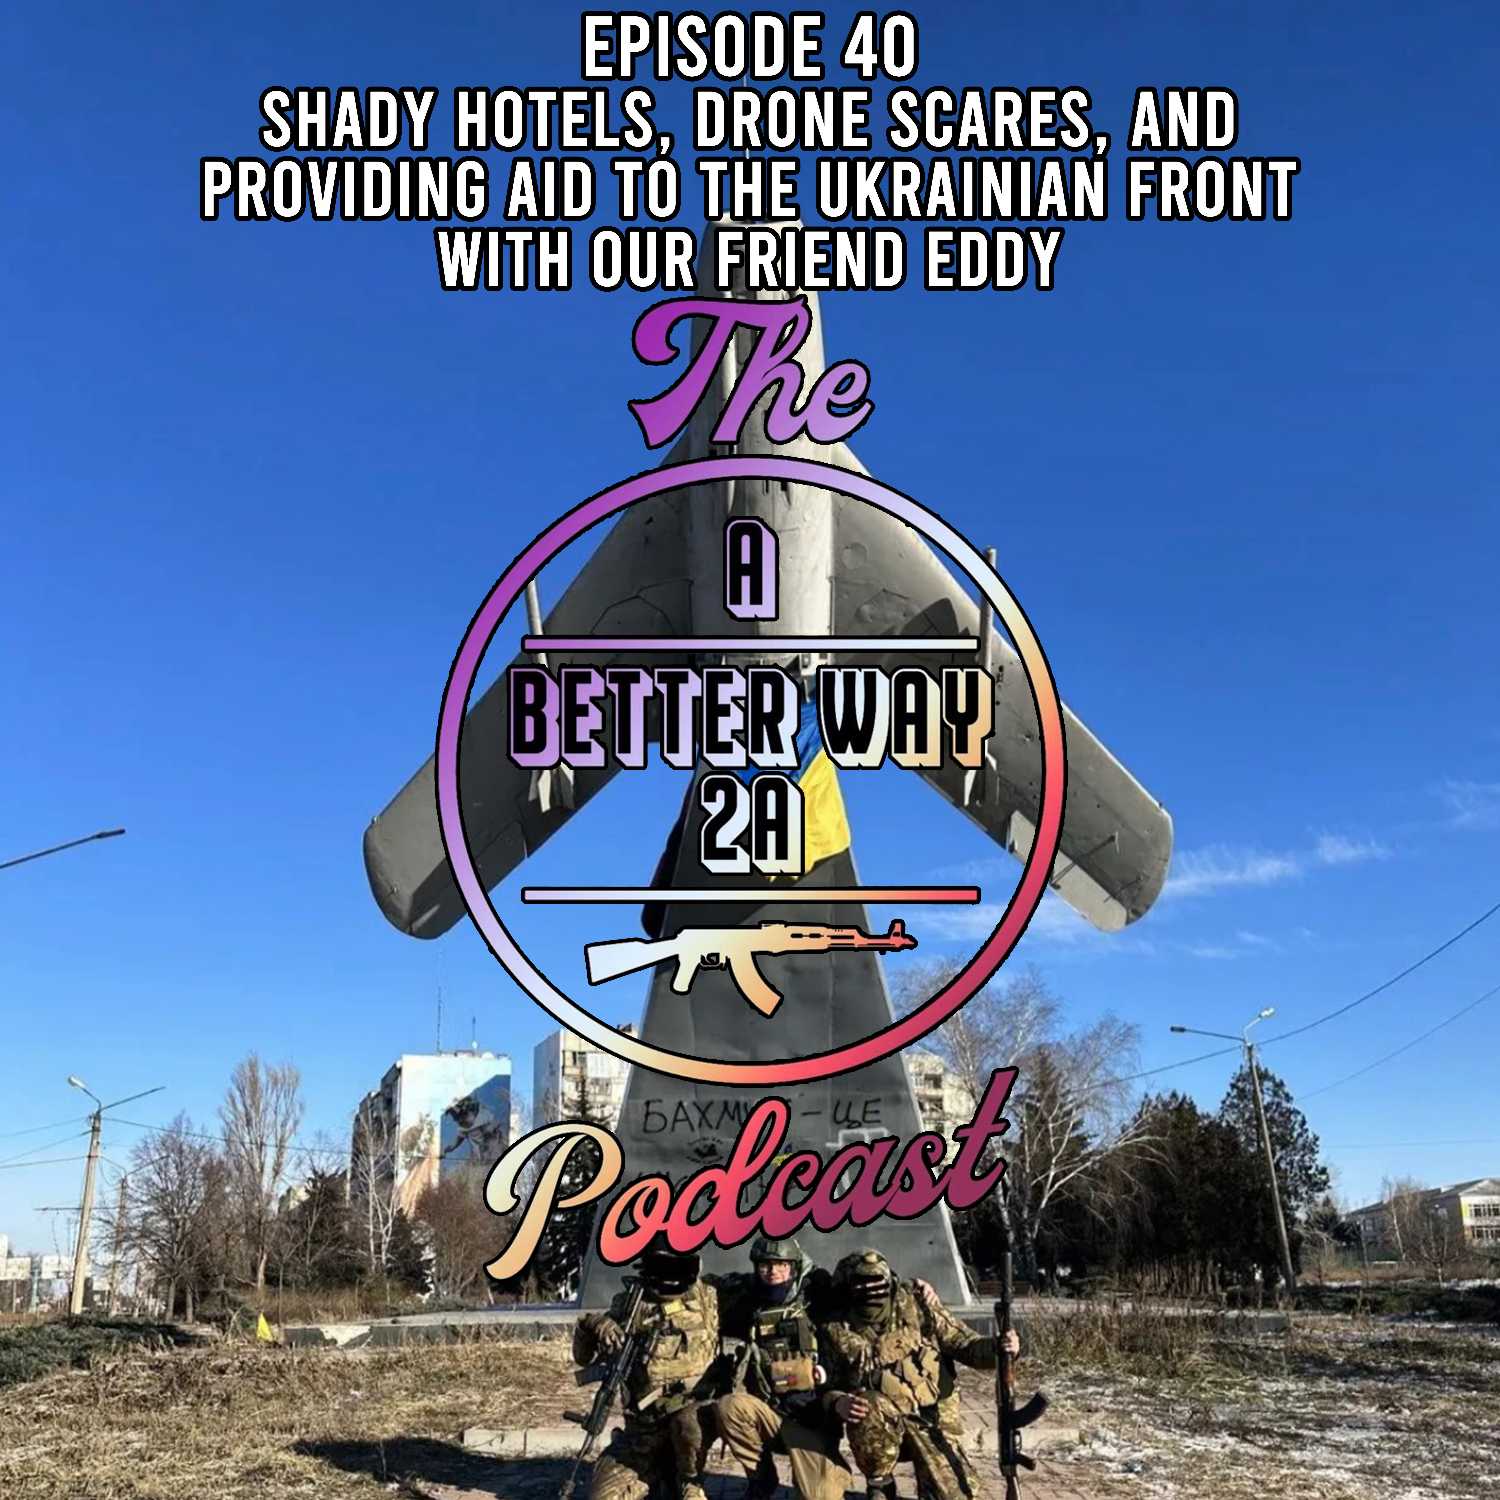 Episode 40 - Shady Hotels, Drone Scares, And Providing Aid To The Ukrainian Front, With Our Friend Eddy